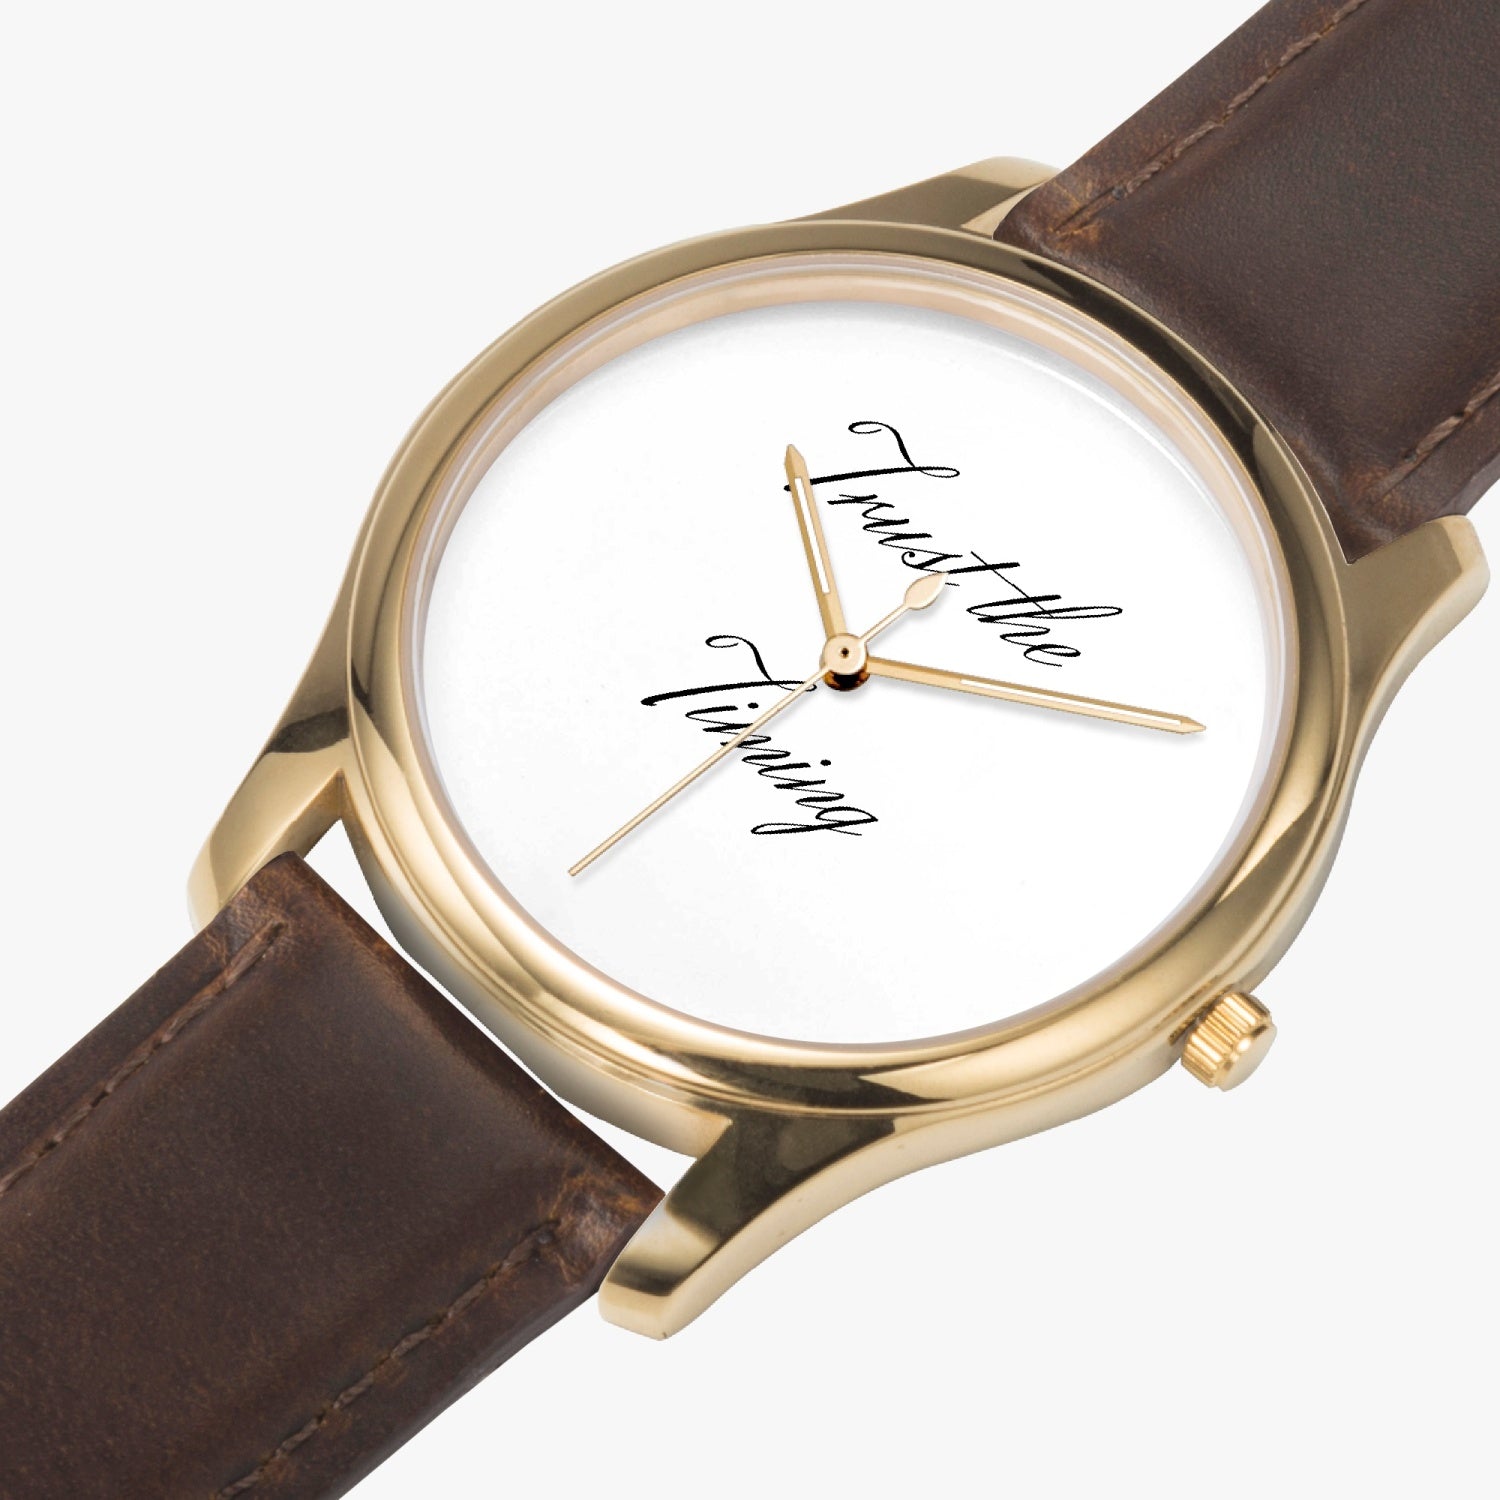 Trust The Timing Leather Strap Classic Quartz Watch - The Kindness Cause